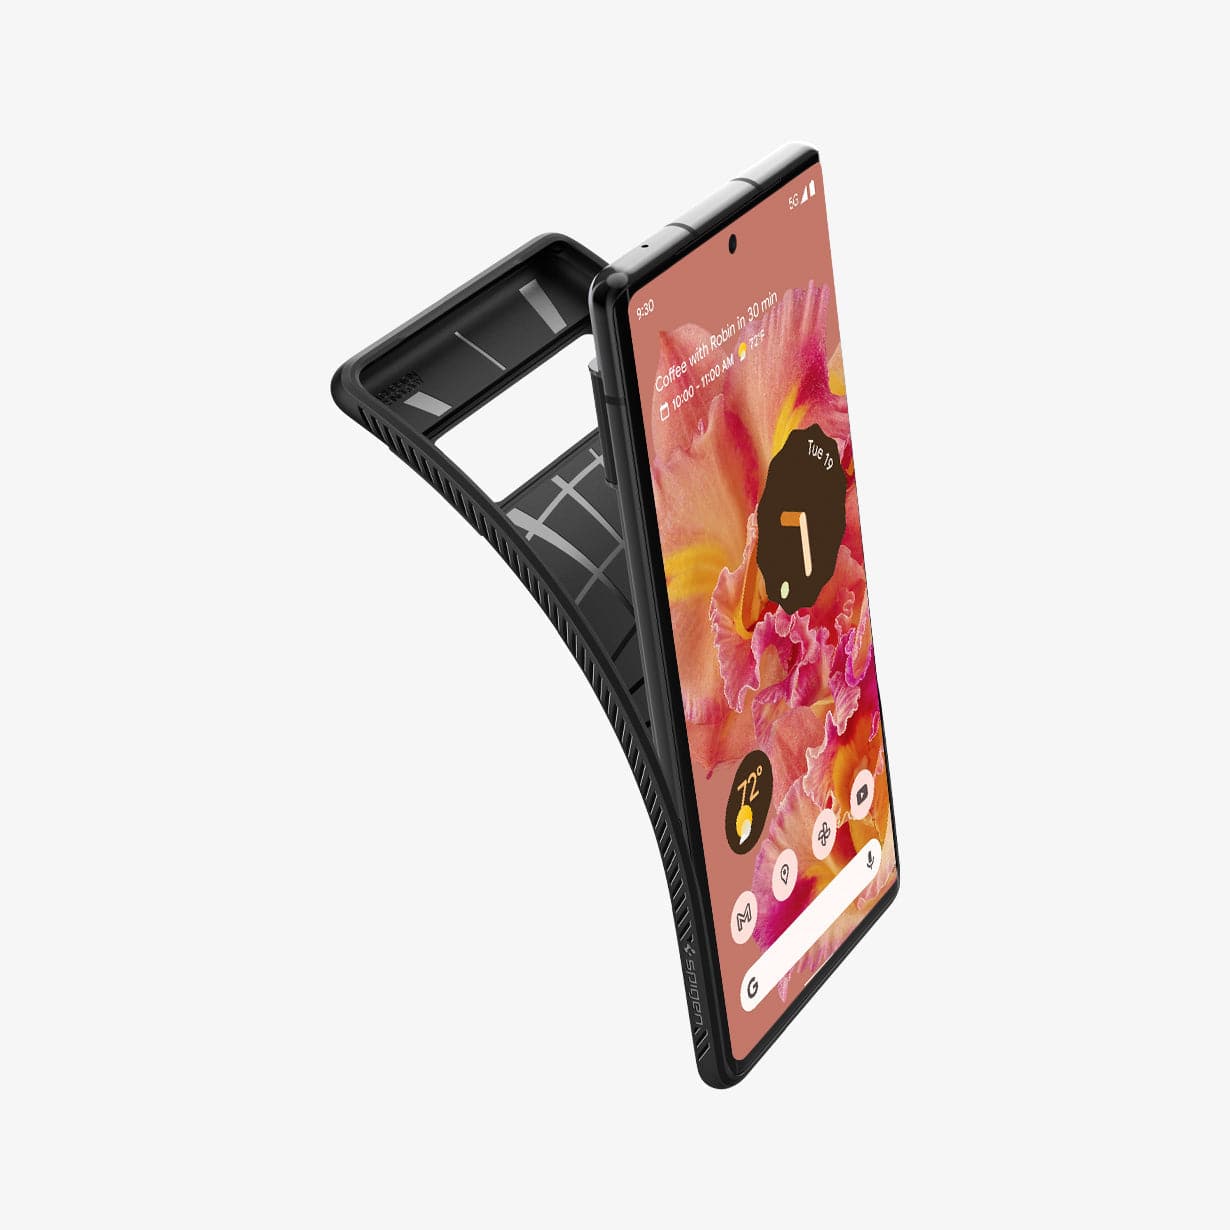 ACS03455 - Pixel 6 Pro Case Liquid Air in black showing the case bending away from device to show the flexibility